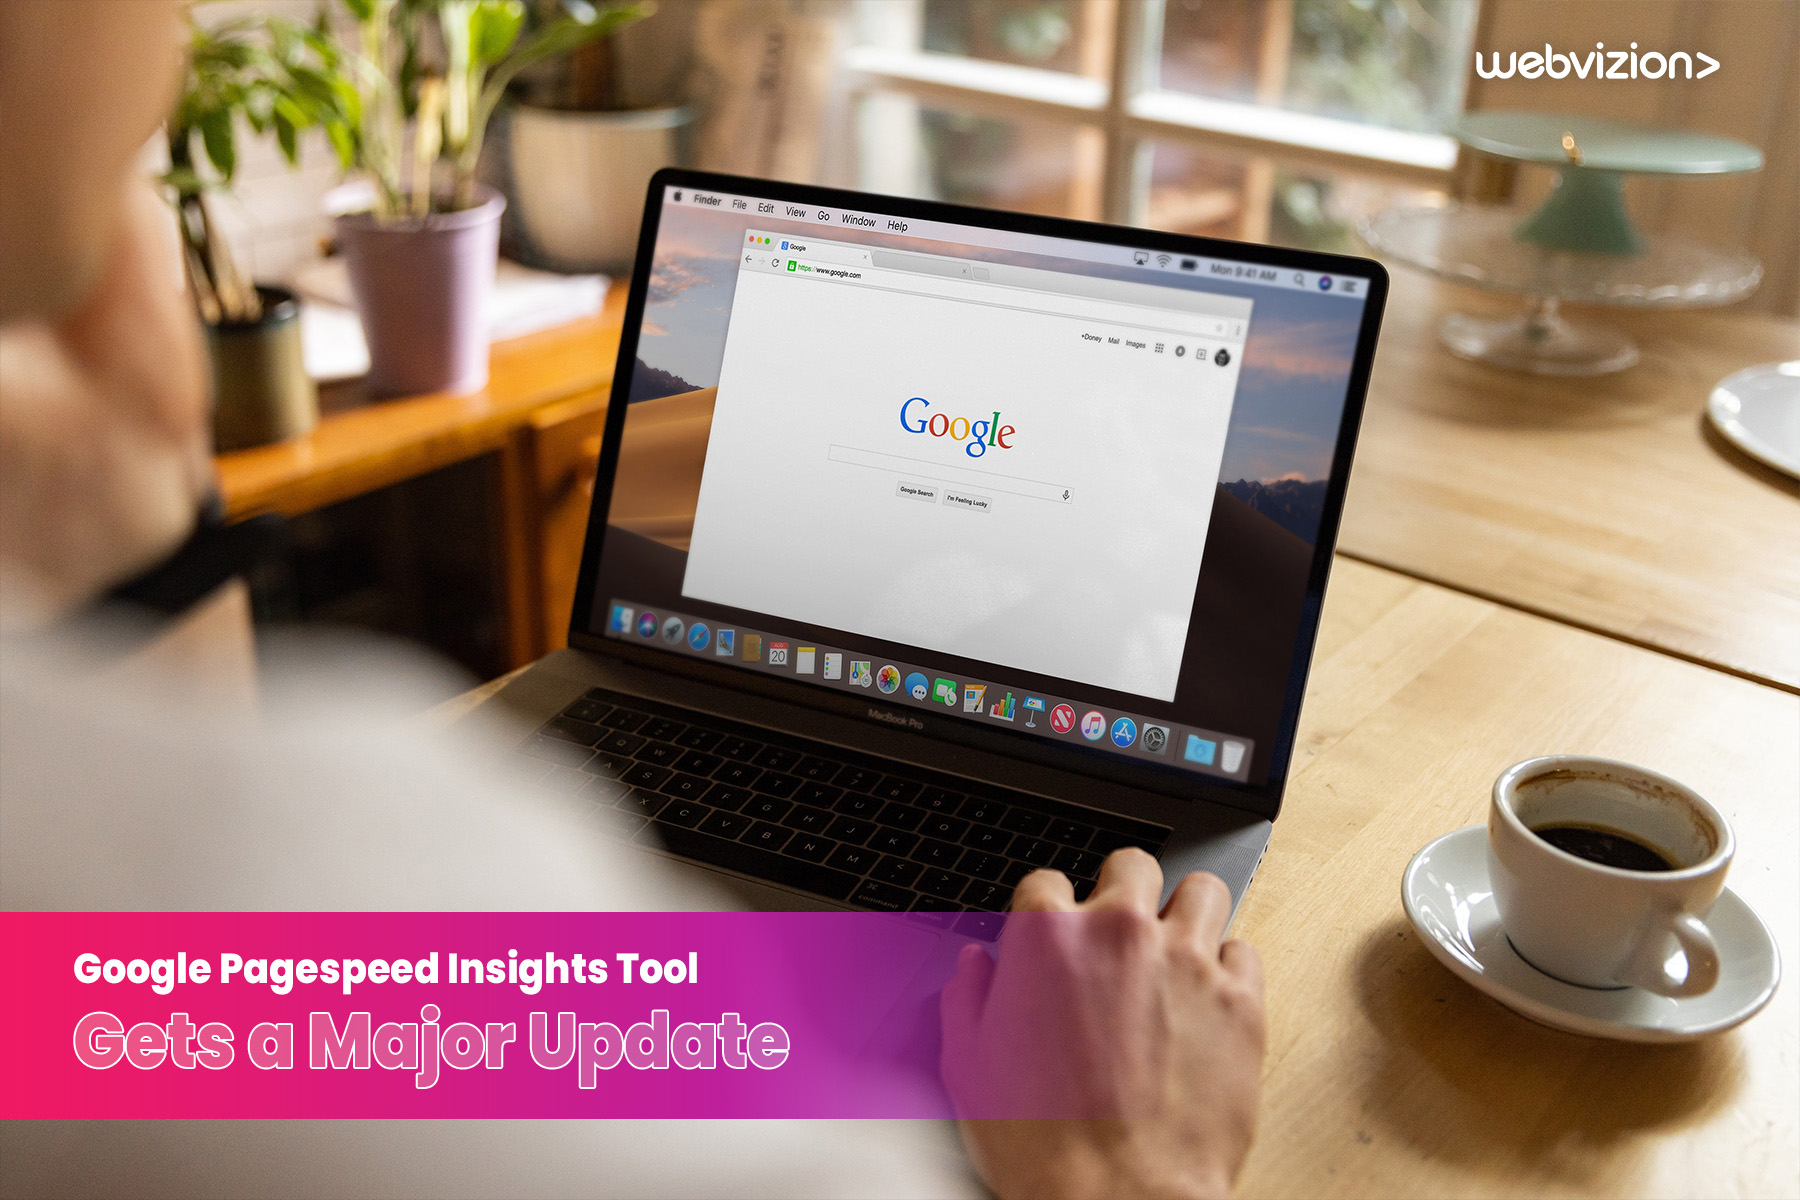 Google Pagespeed Insights Tool Gets a Major Update